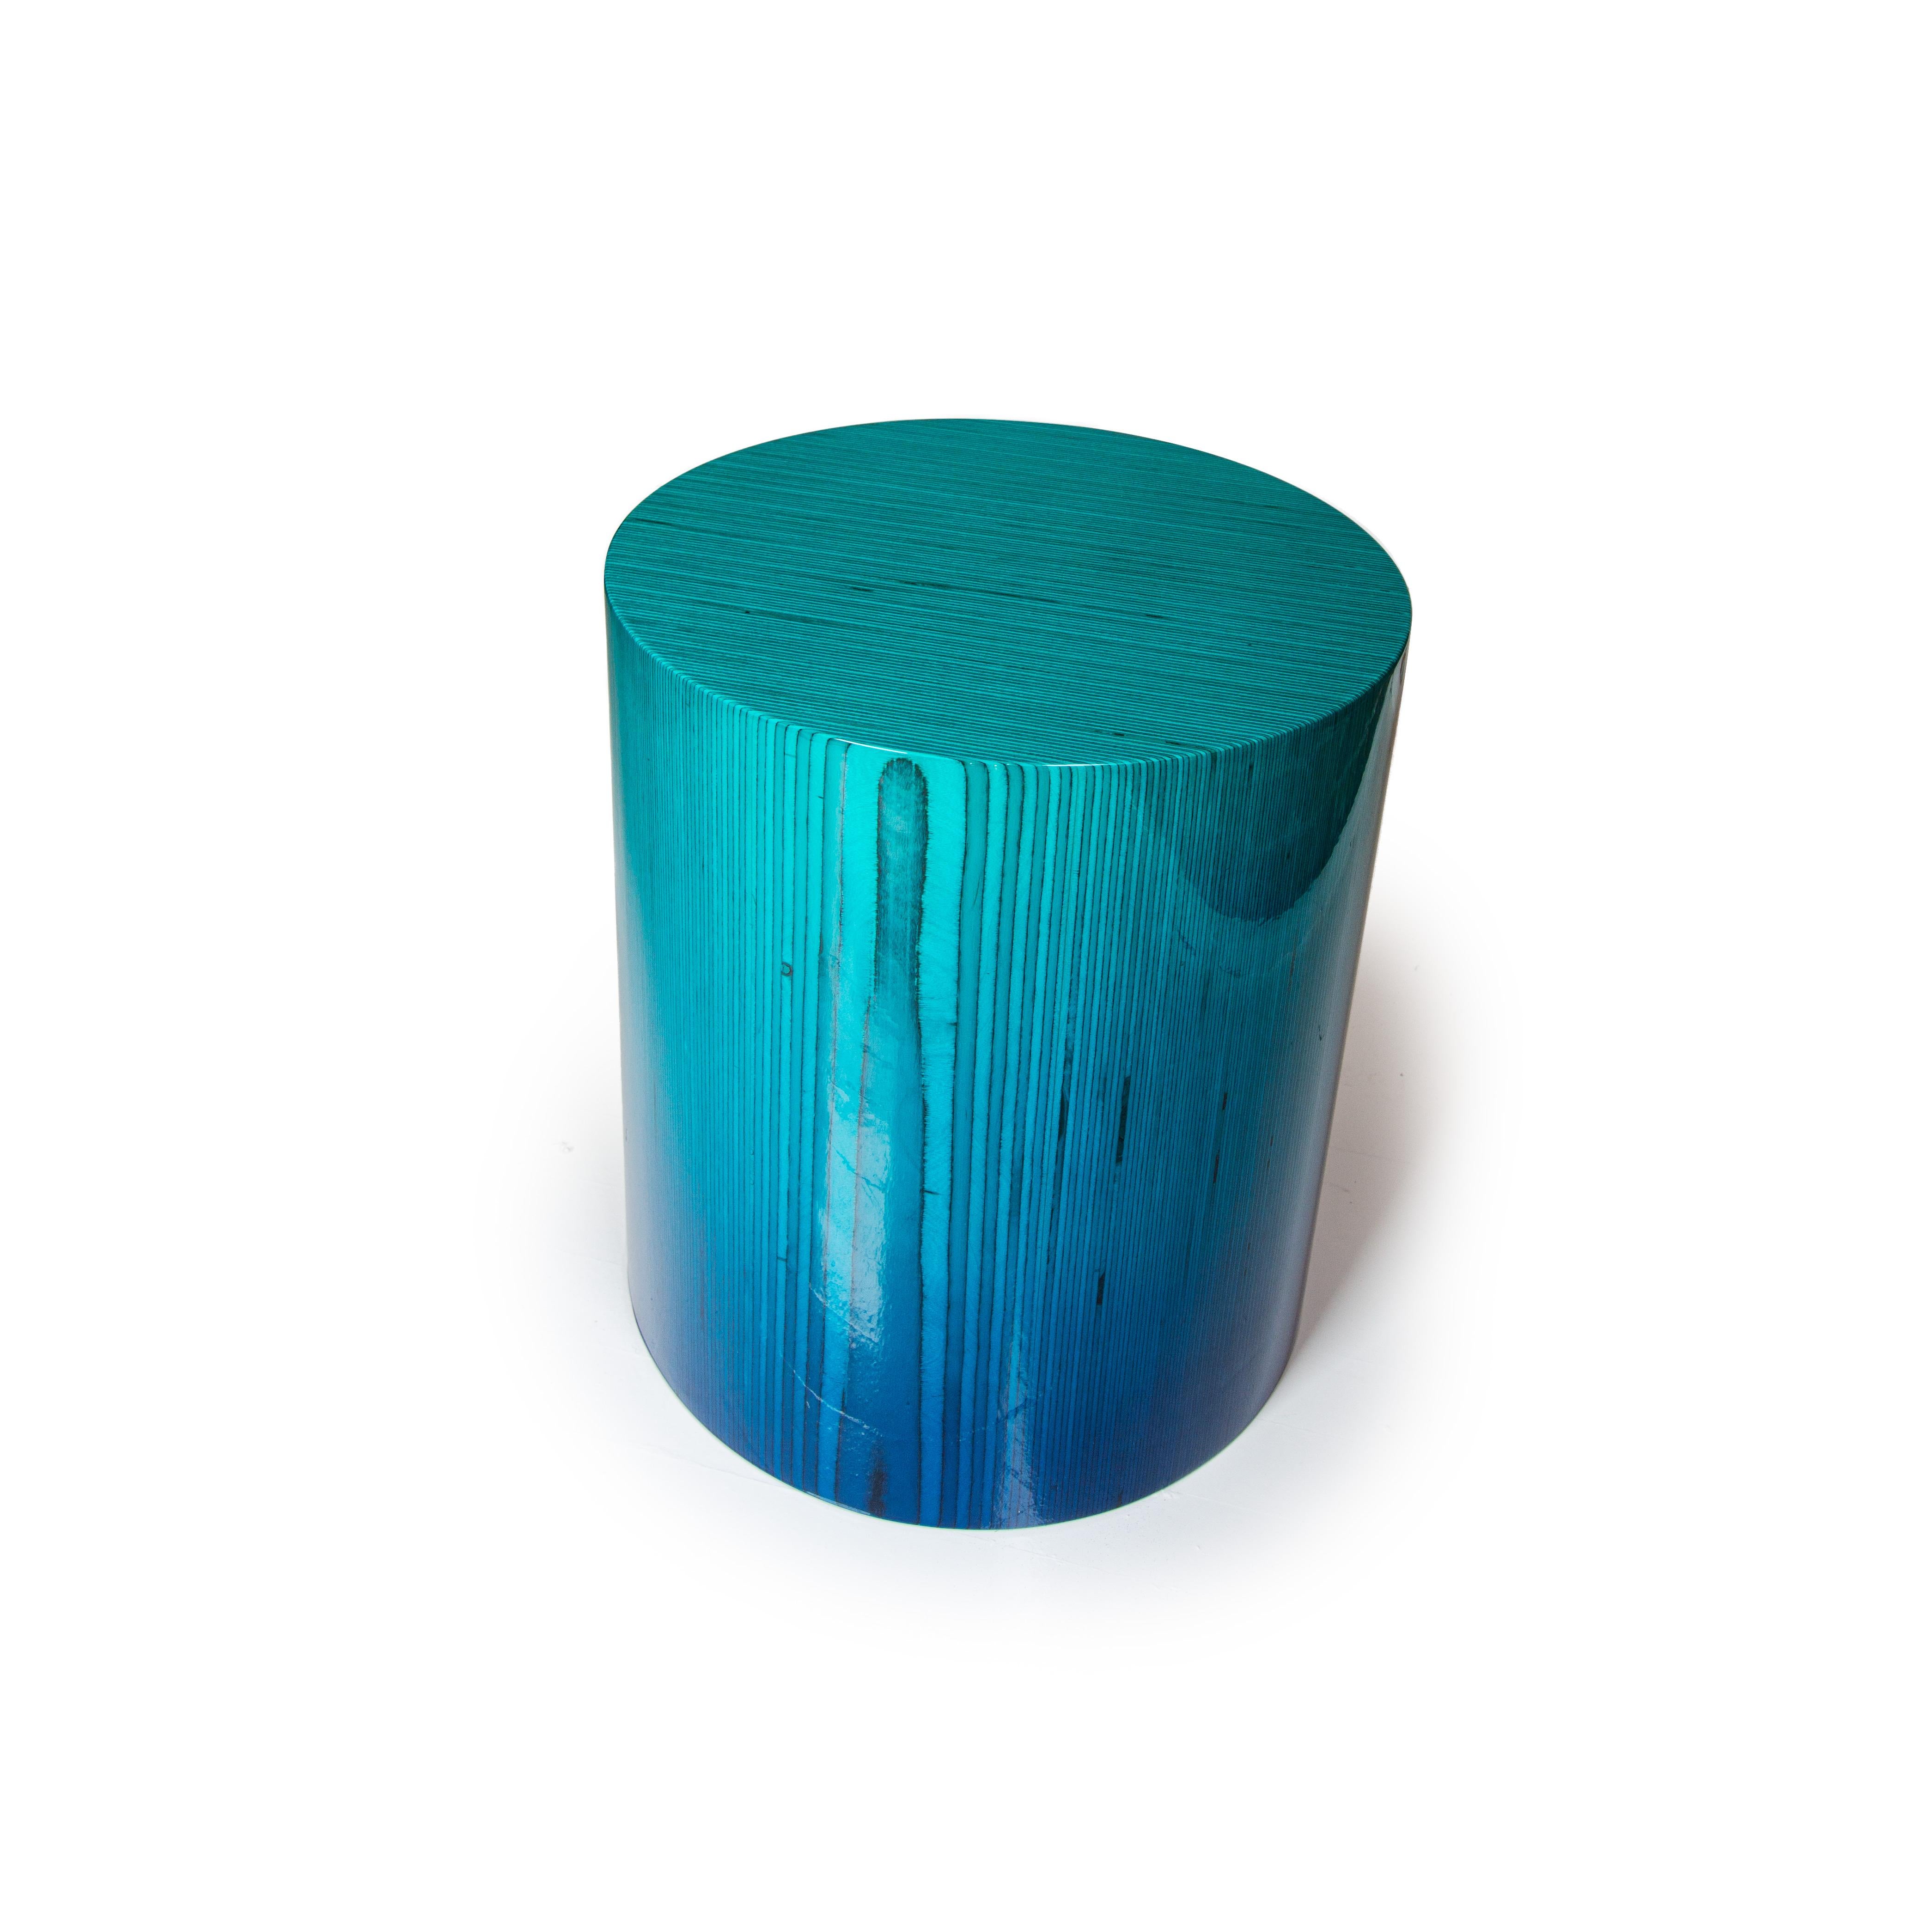 American Stack Vert Stool or Side Table in Teal by Timbur, Represented by Tuleste Factory For Sale